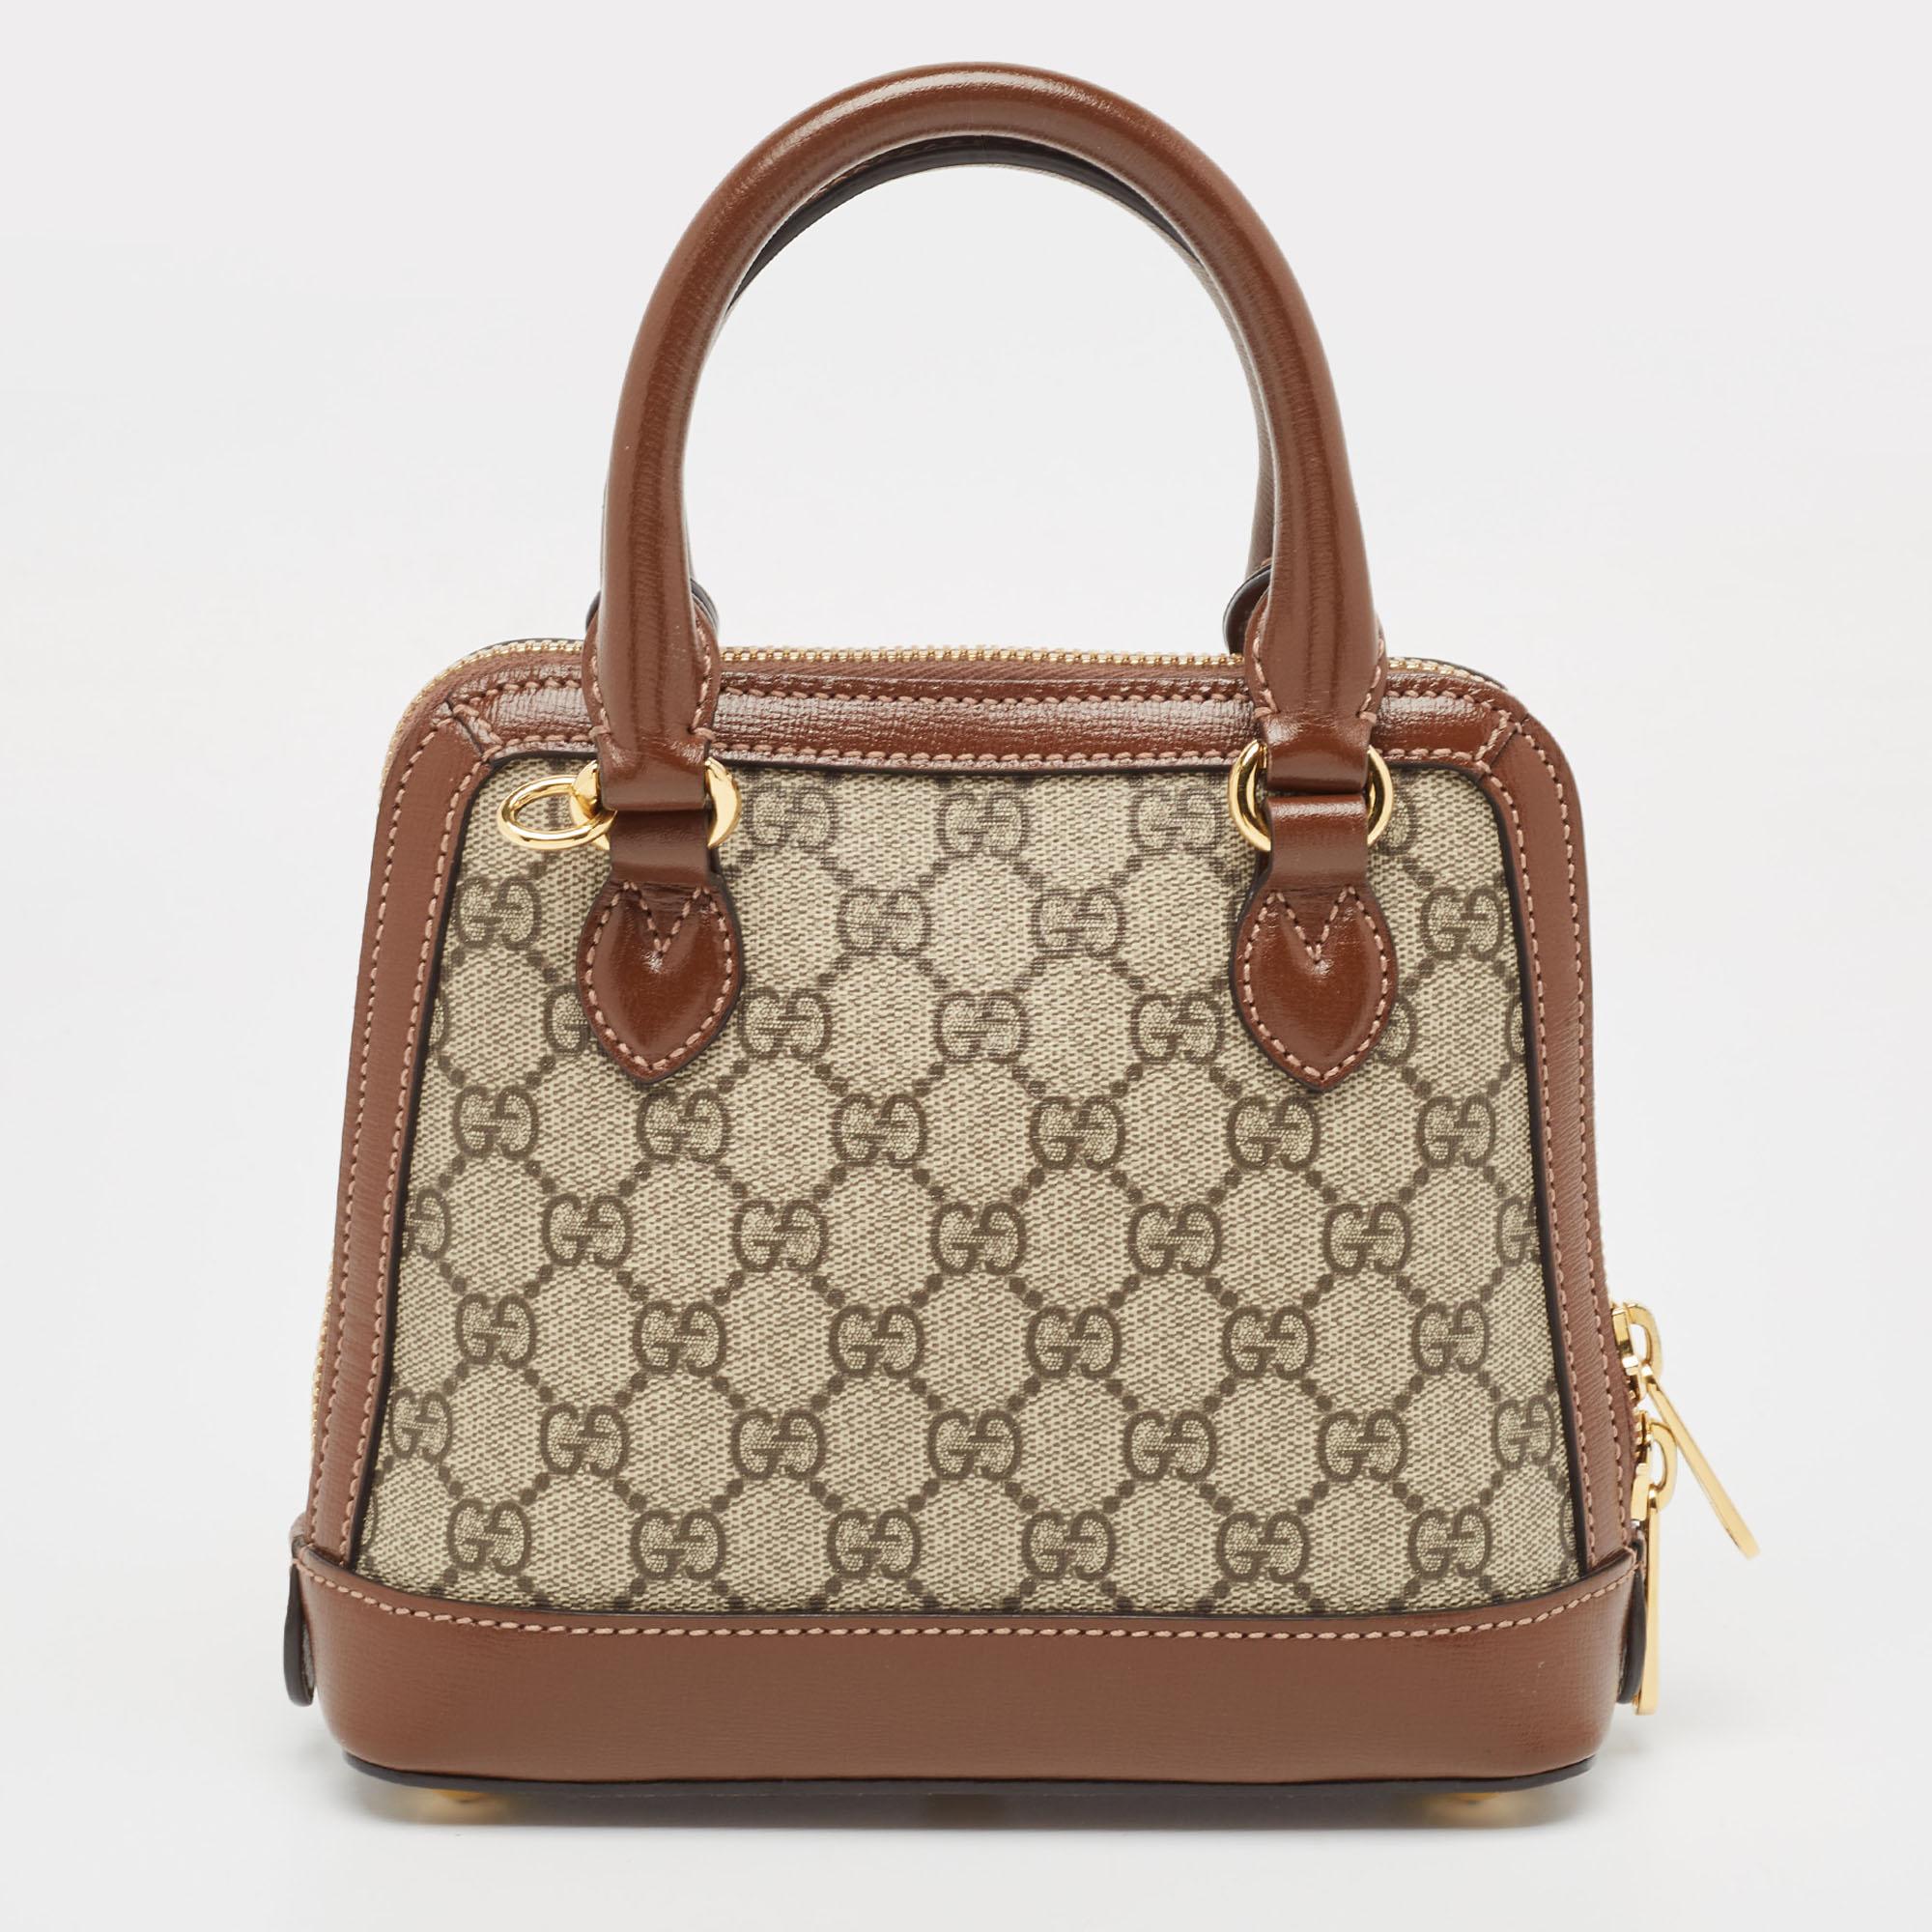 The Gucci Horsebit 1955 Top Handle Bag is a timeless marvel of craftsmanship. Its iconic GG Supreme canvas, accented with the signature horsebit detail, exudes sophistication. Compact yet spacious, it effortlessly blends style with functionality,